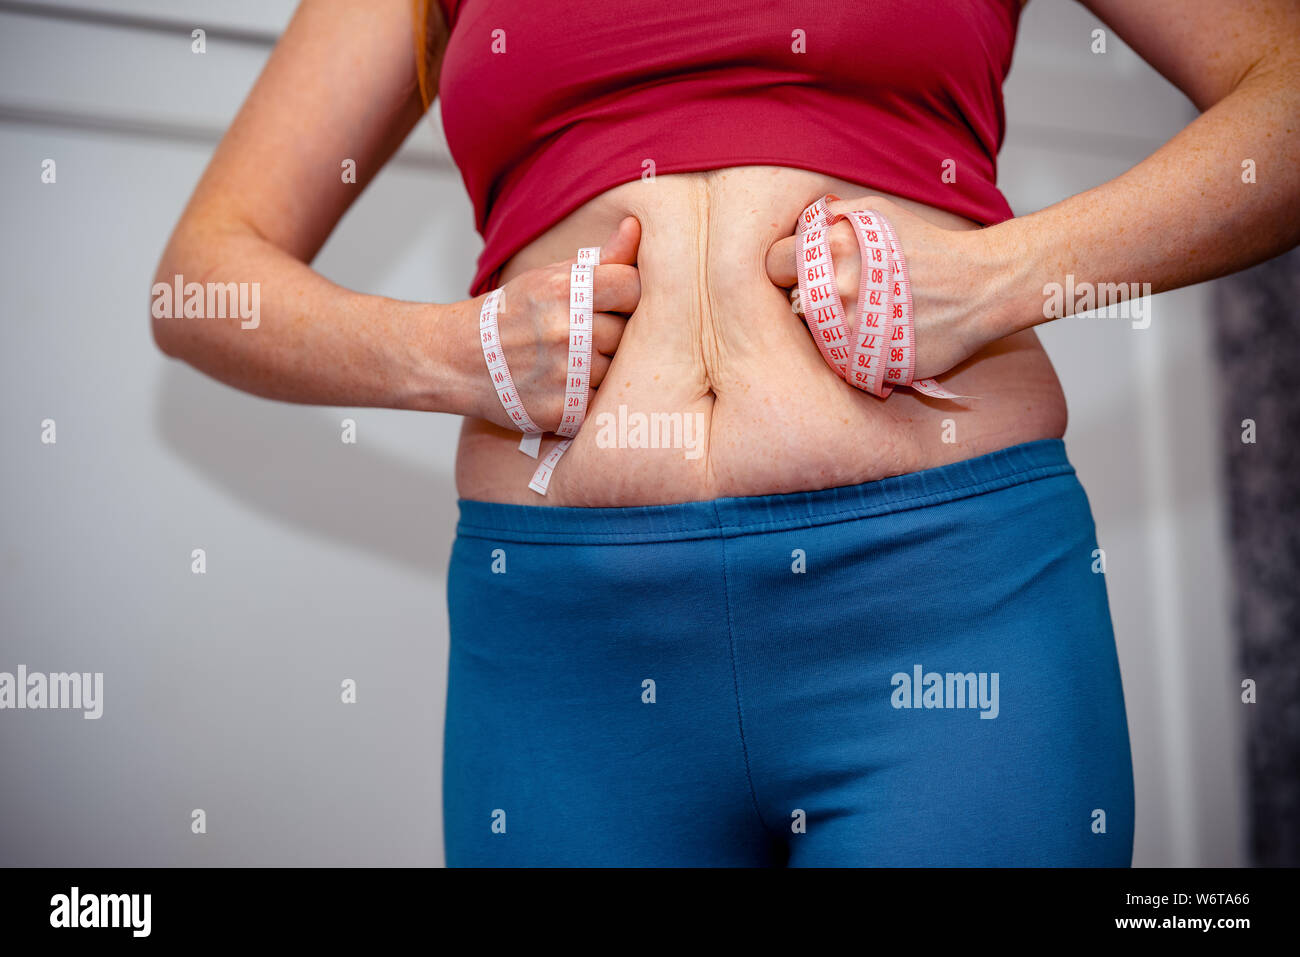 Closeup of woman pinching belly fat. Young slim woman in blue shorts pinching her abdomen. Diet and weight loss concept. Stock Photo